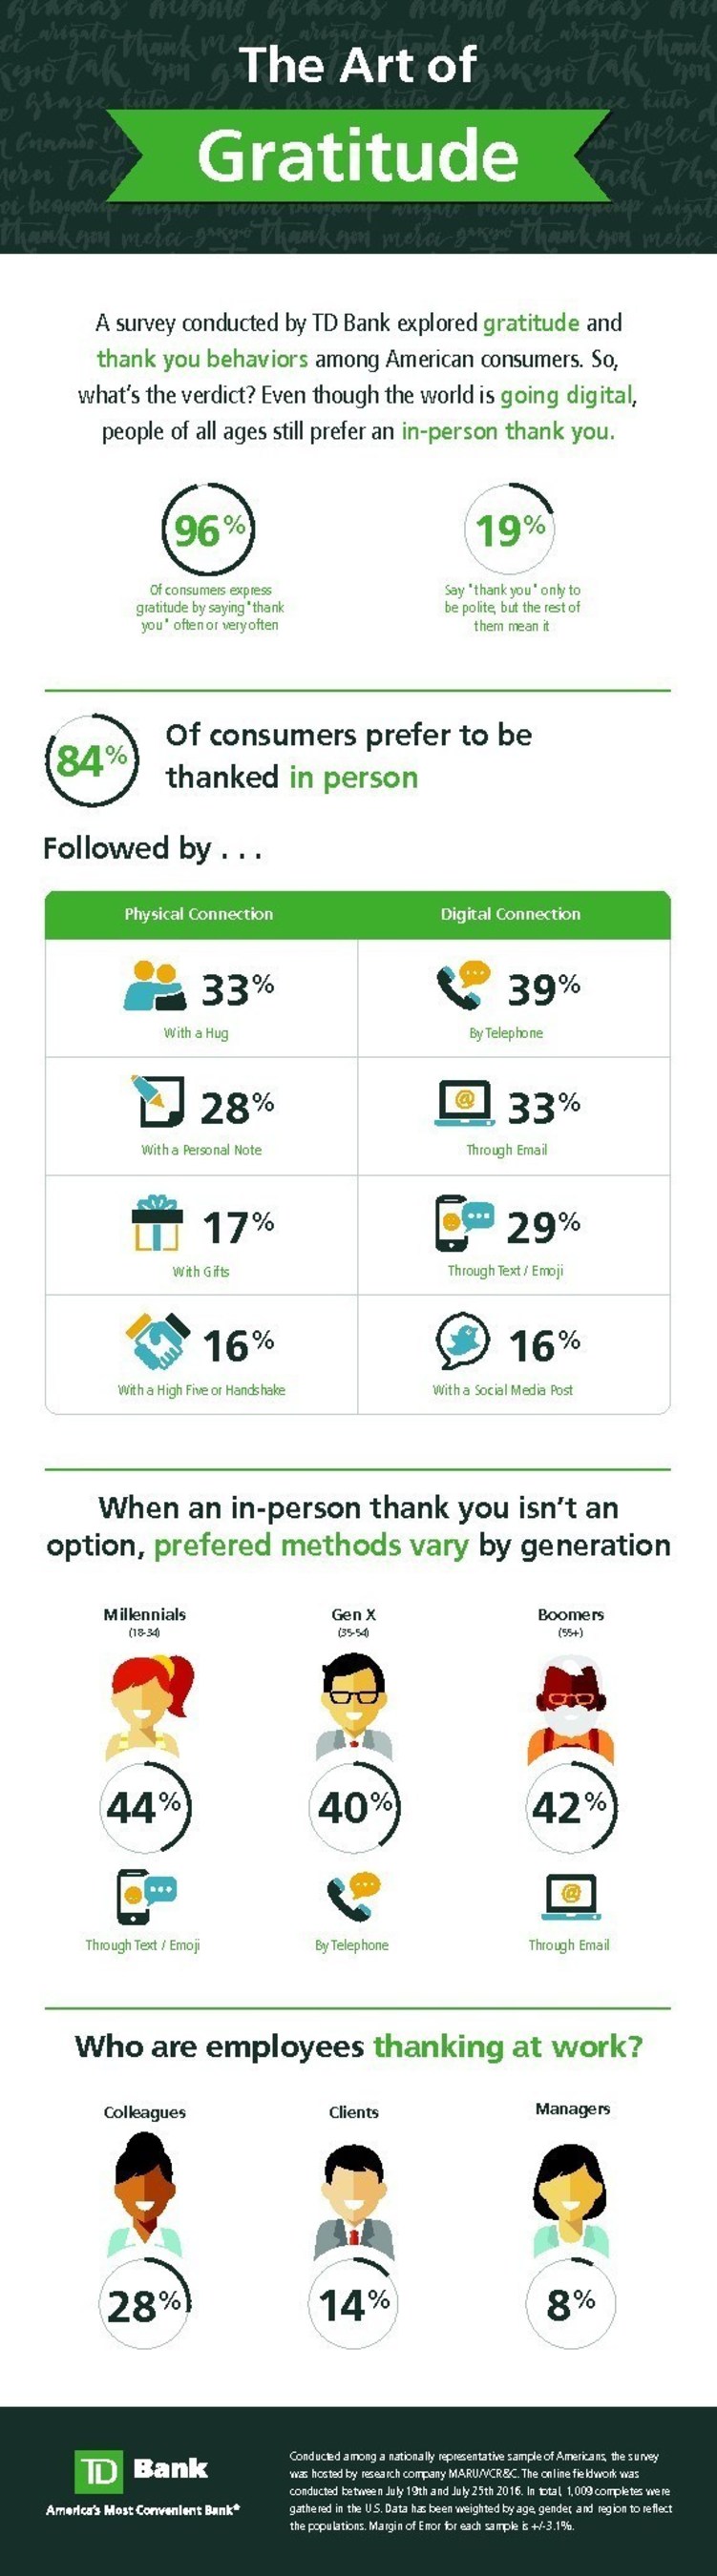 TD Bank, in conjunction with a survey vendor, polled more than 1,000 consumers across the U.S. to learn about how Americans feel about gratitude and saying "thank you."